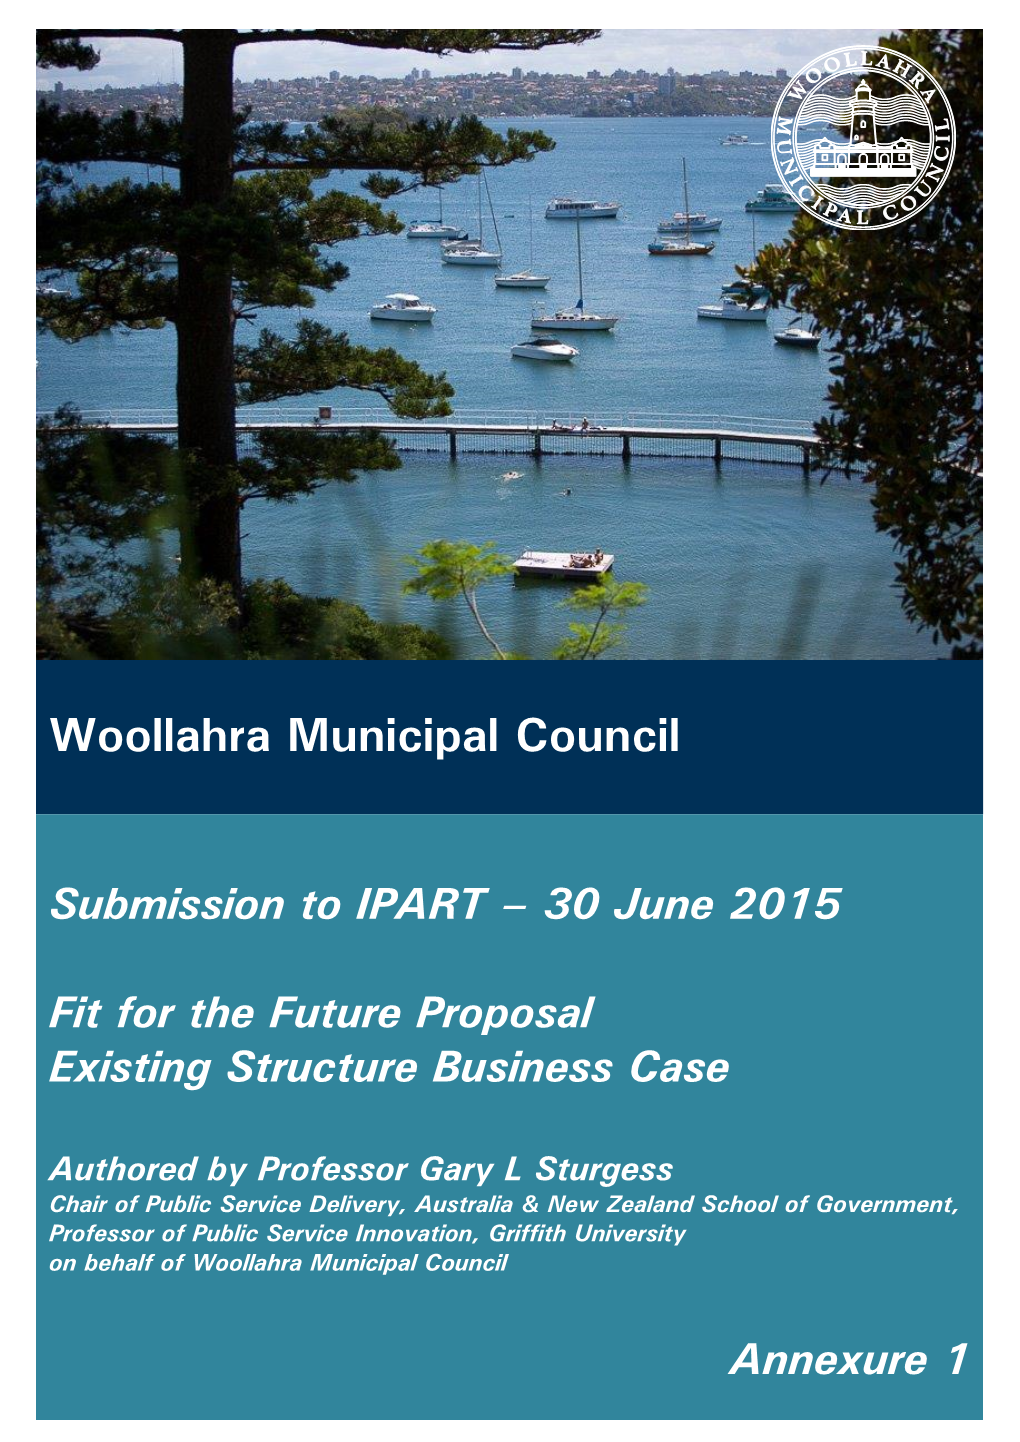 Woollahra Municipal Council Submission to IPART